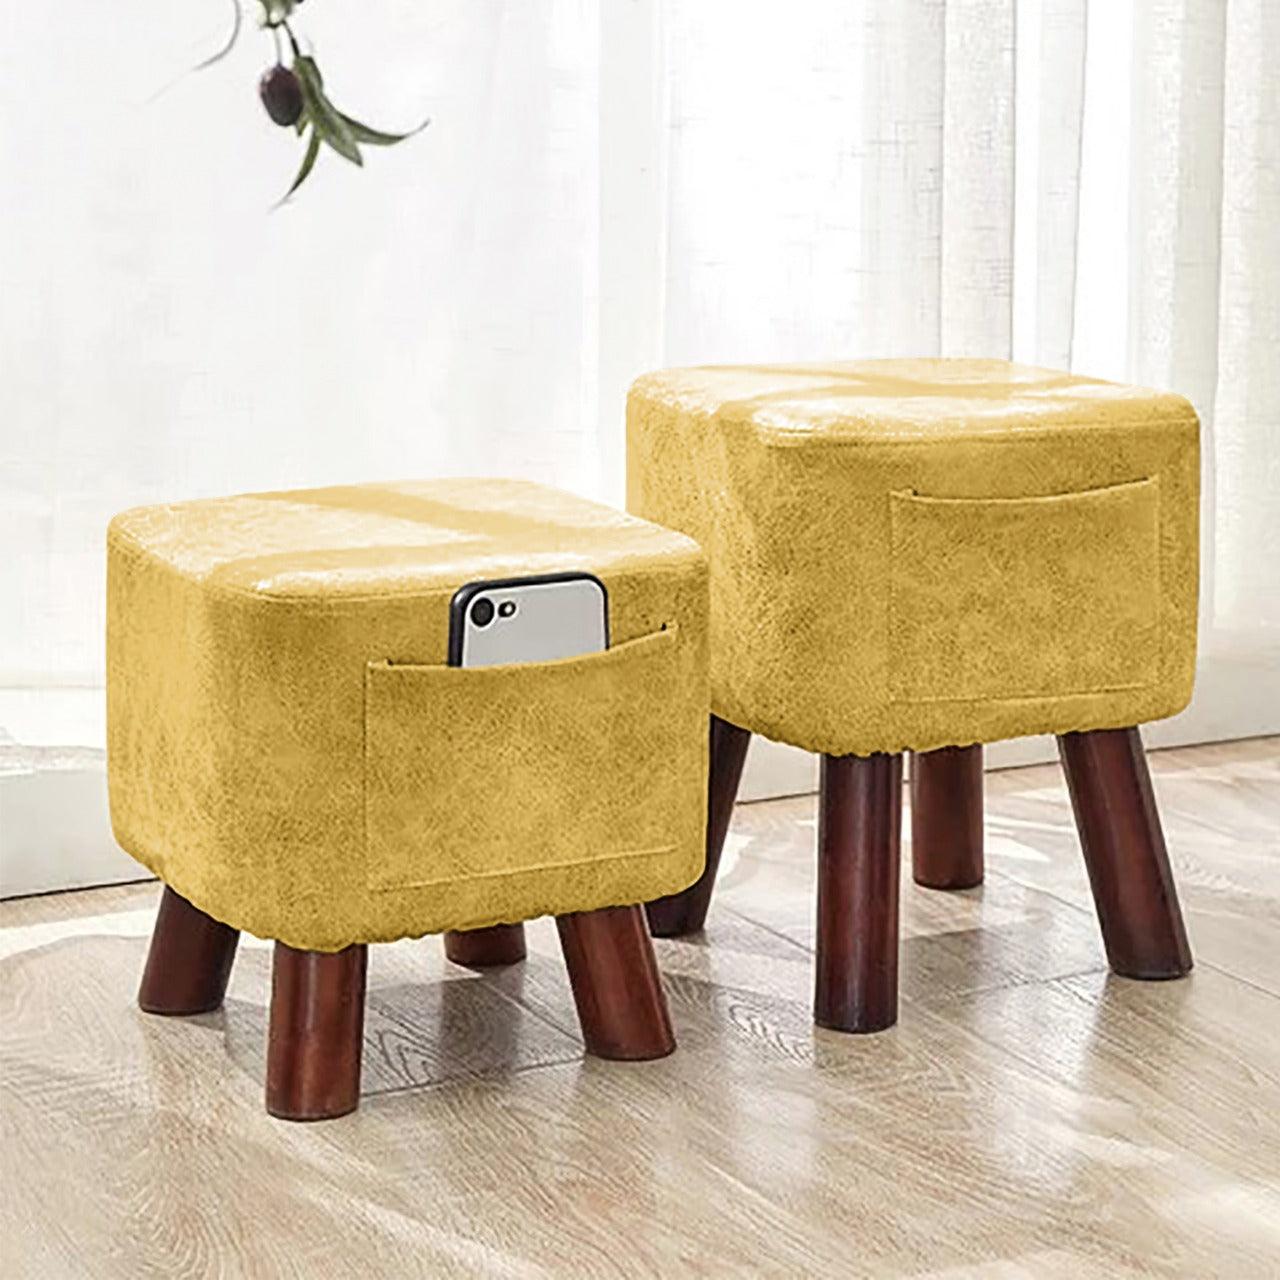 Wooden stool Square shape With Pocket - 147 - 92Bedding